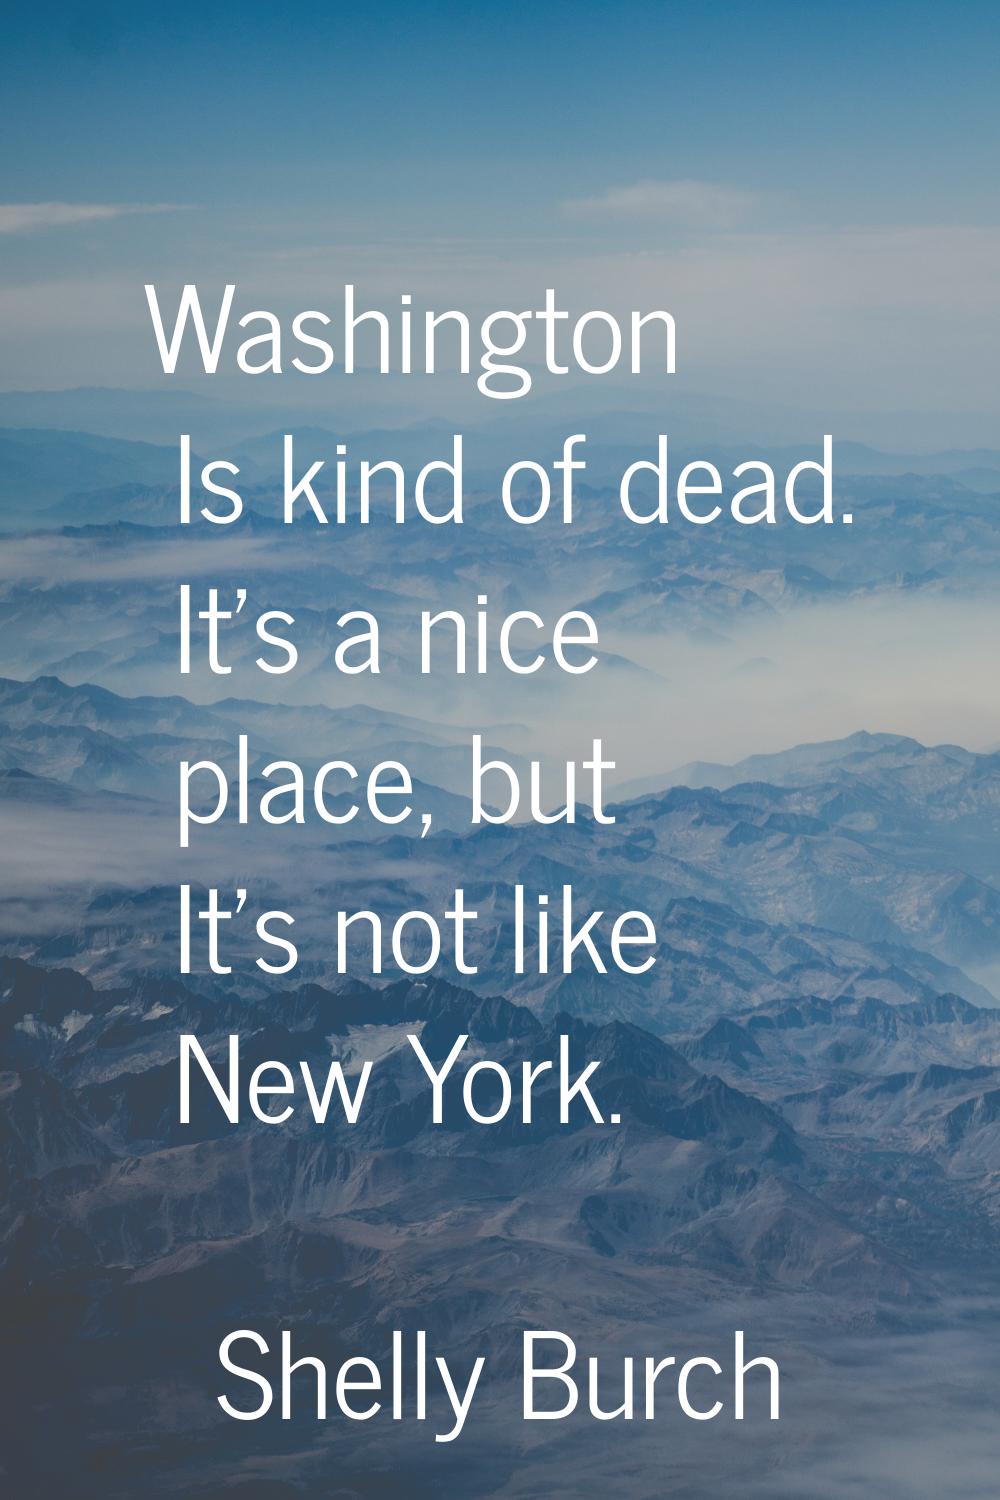 Washington Is kind of dead. It's a nice place, but It's not like New York.